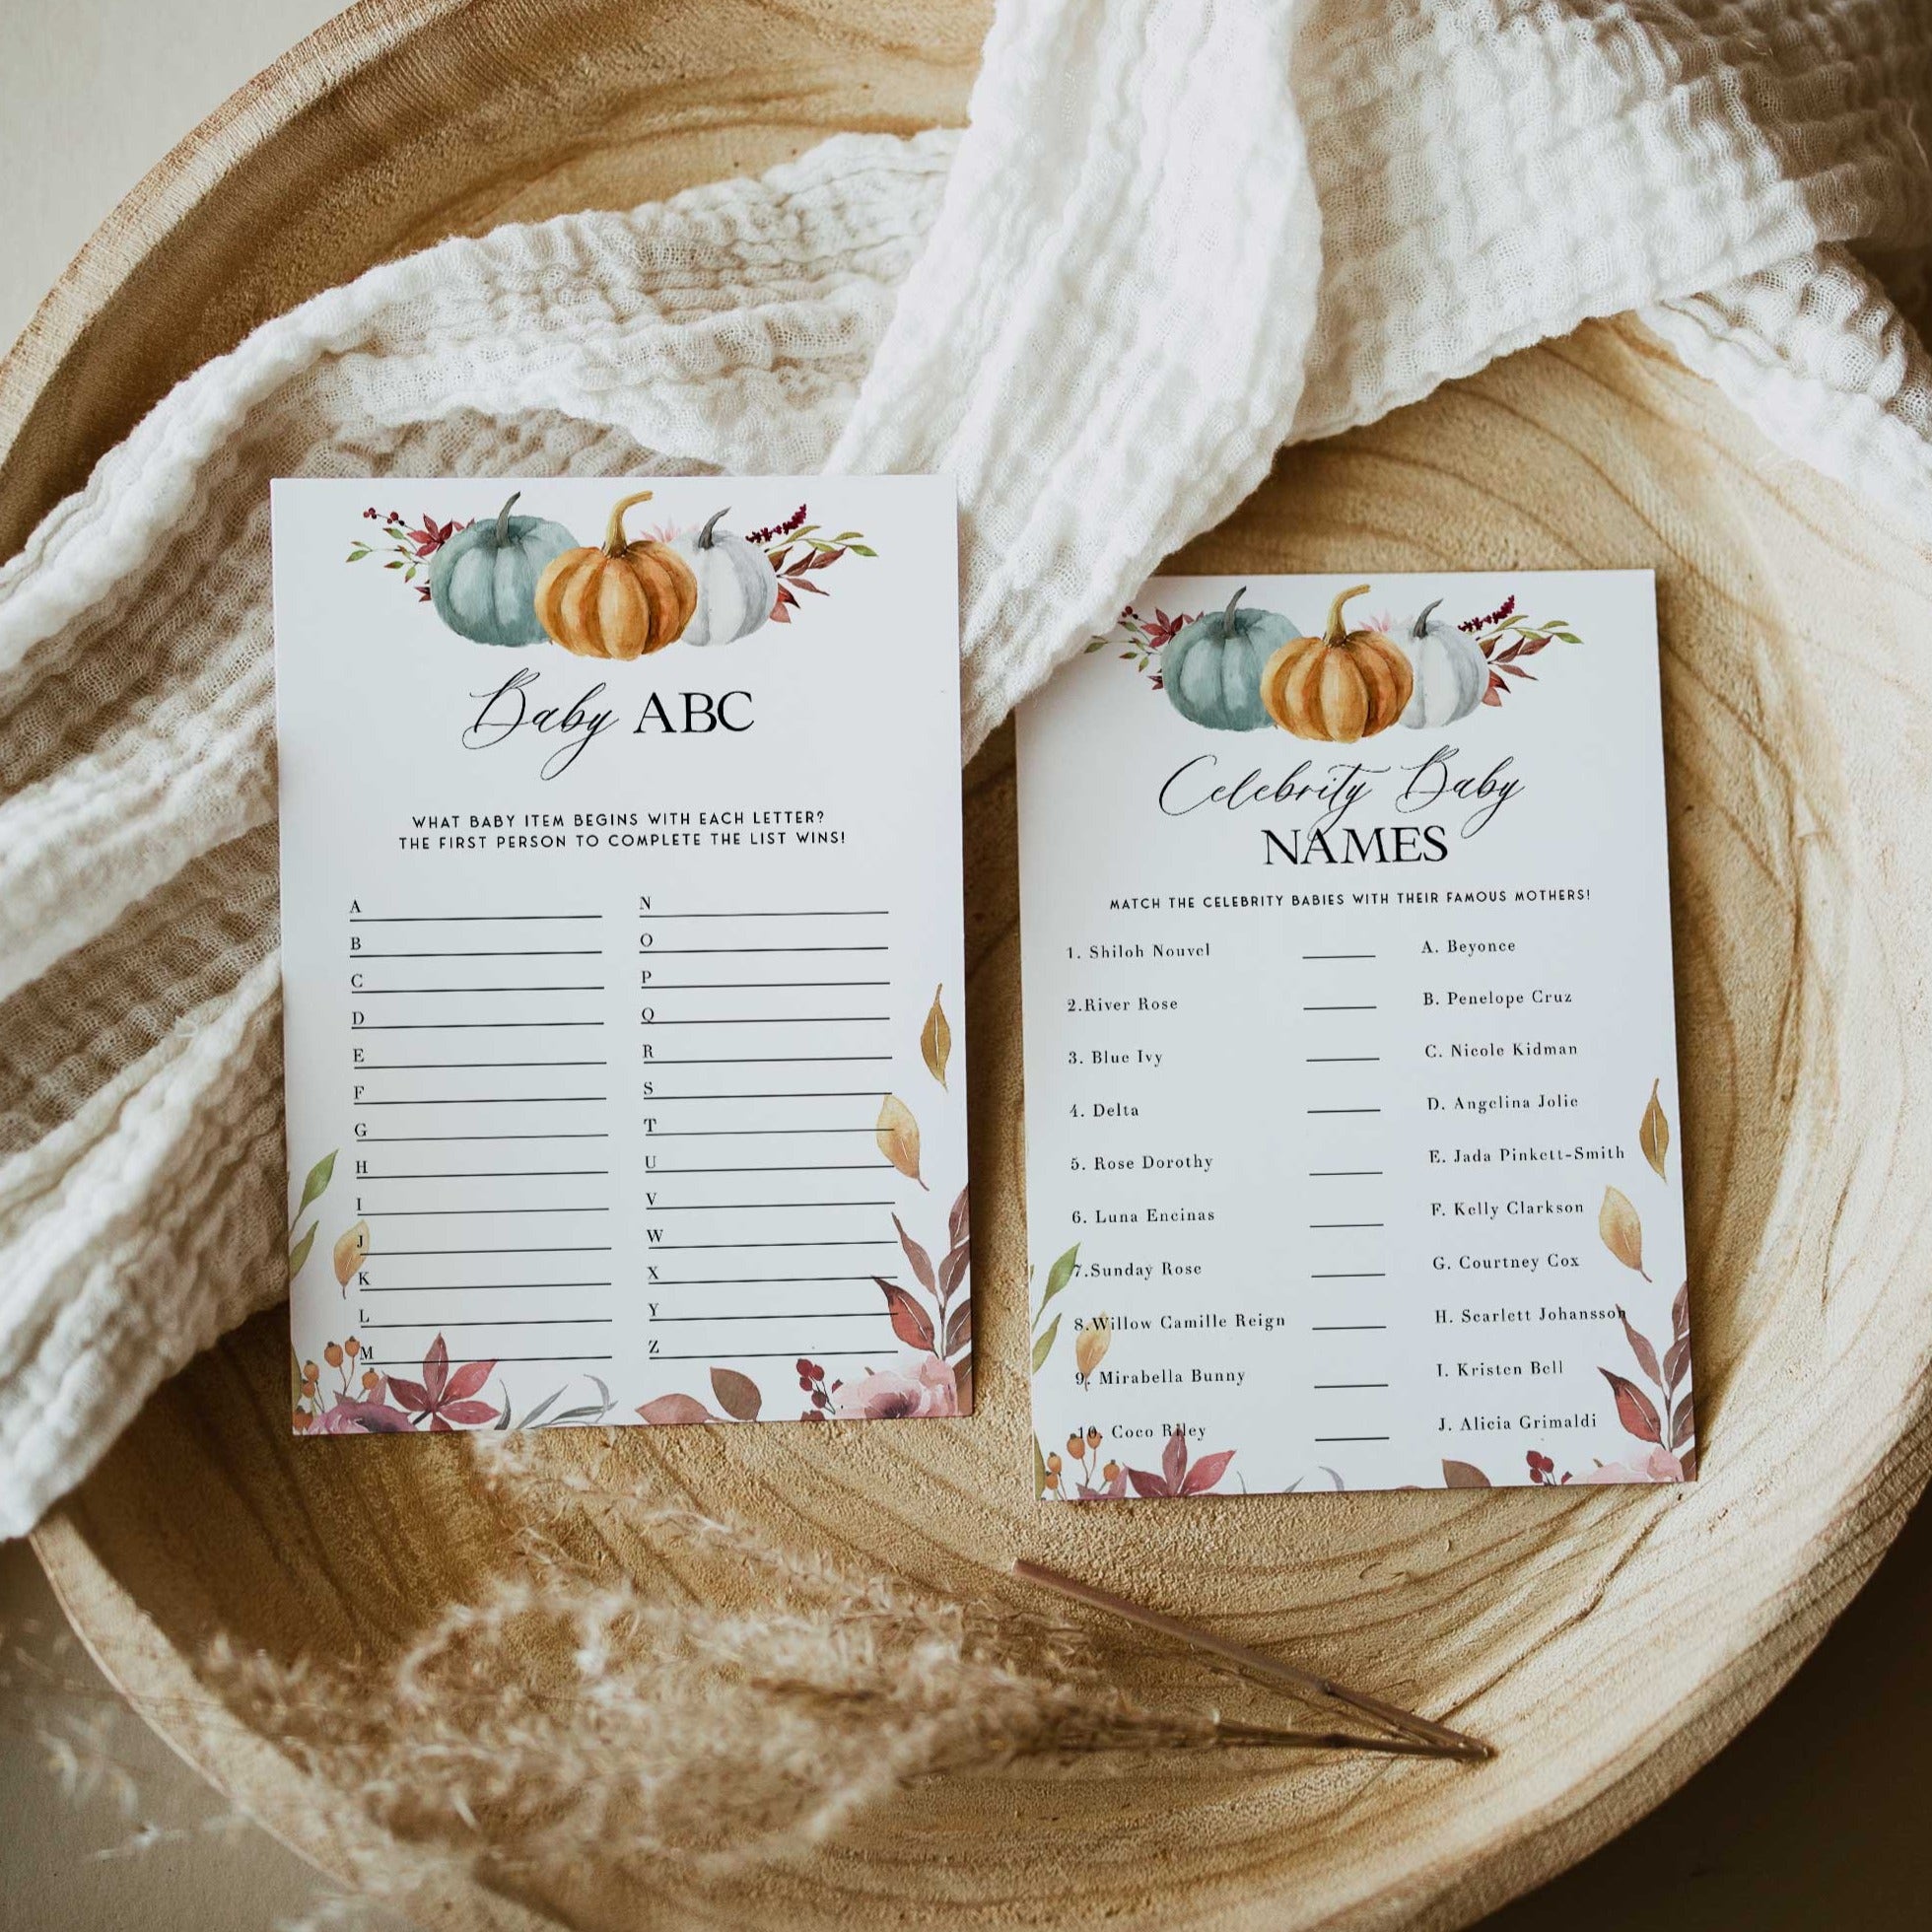 Fully editable and printable 60 baby shower games with a fall pumpkin design. Perfect for a Fall Pumpkin baby shower themed party